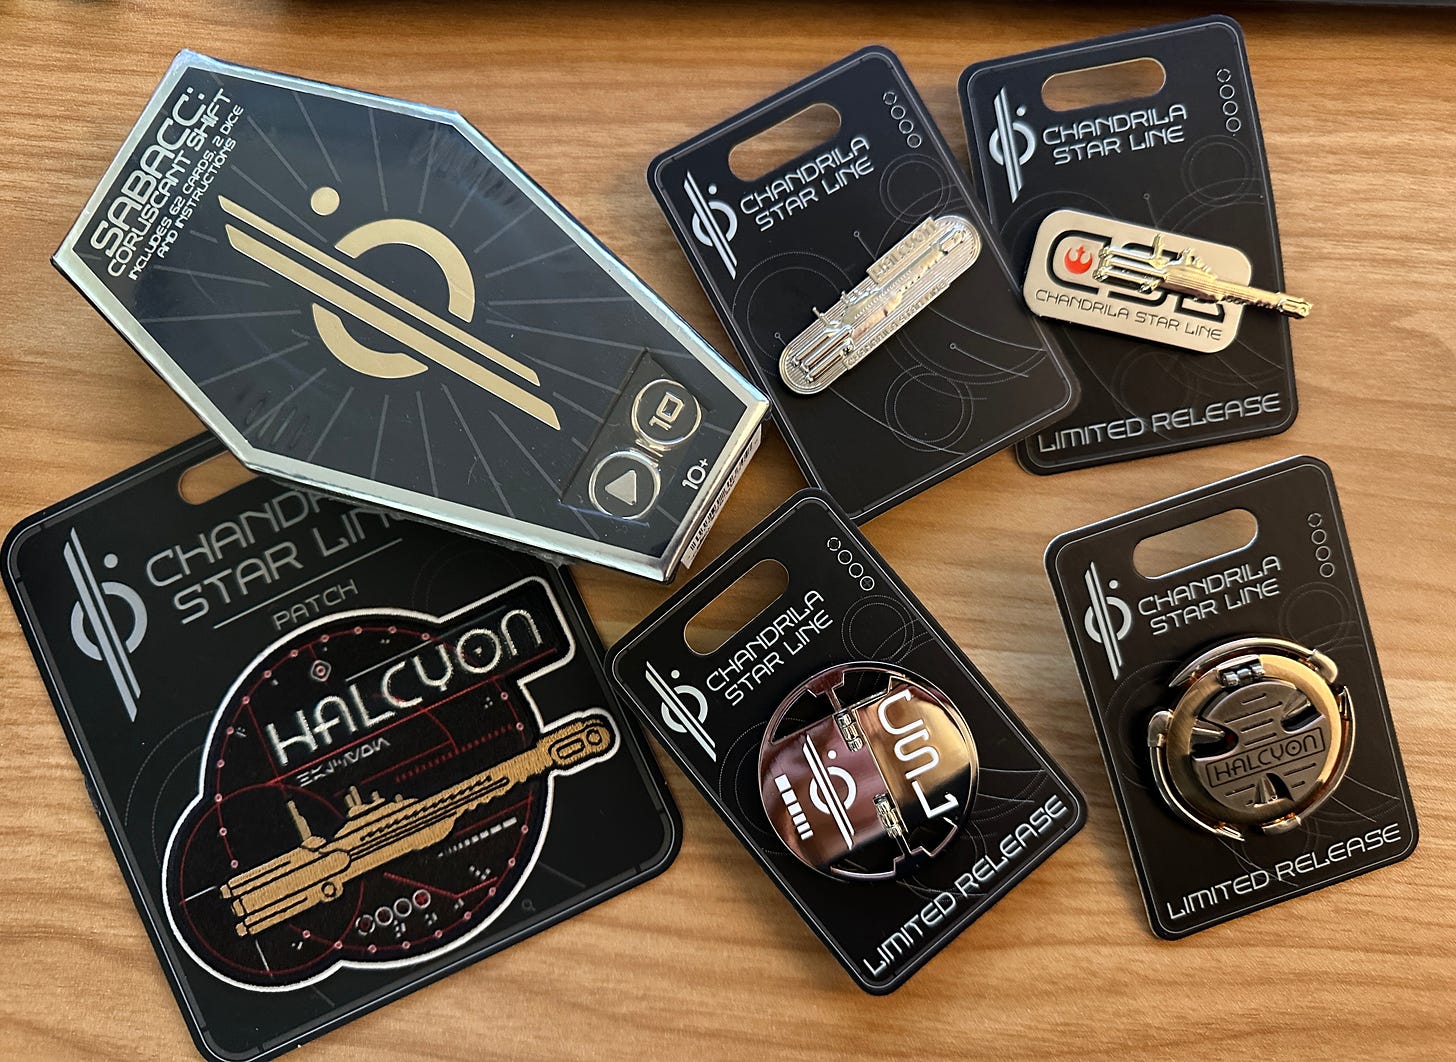 A scattering of Chandrila Star Line branded pins, a patch, and a sabacc set